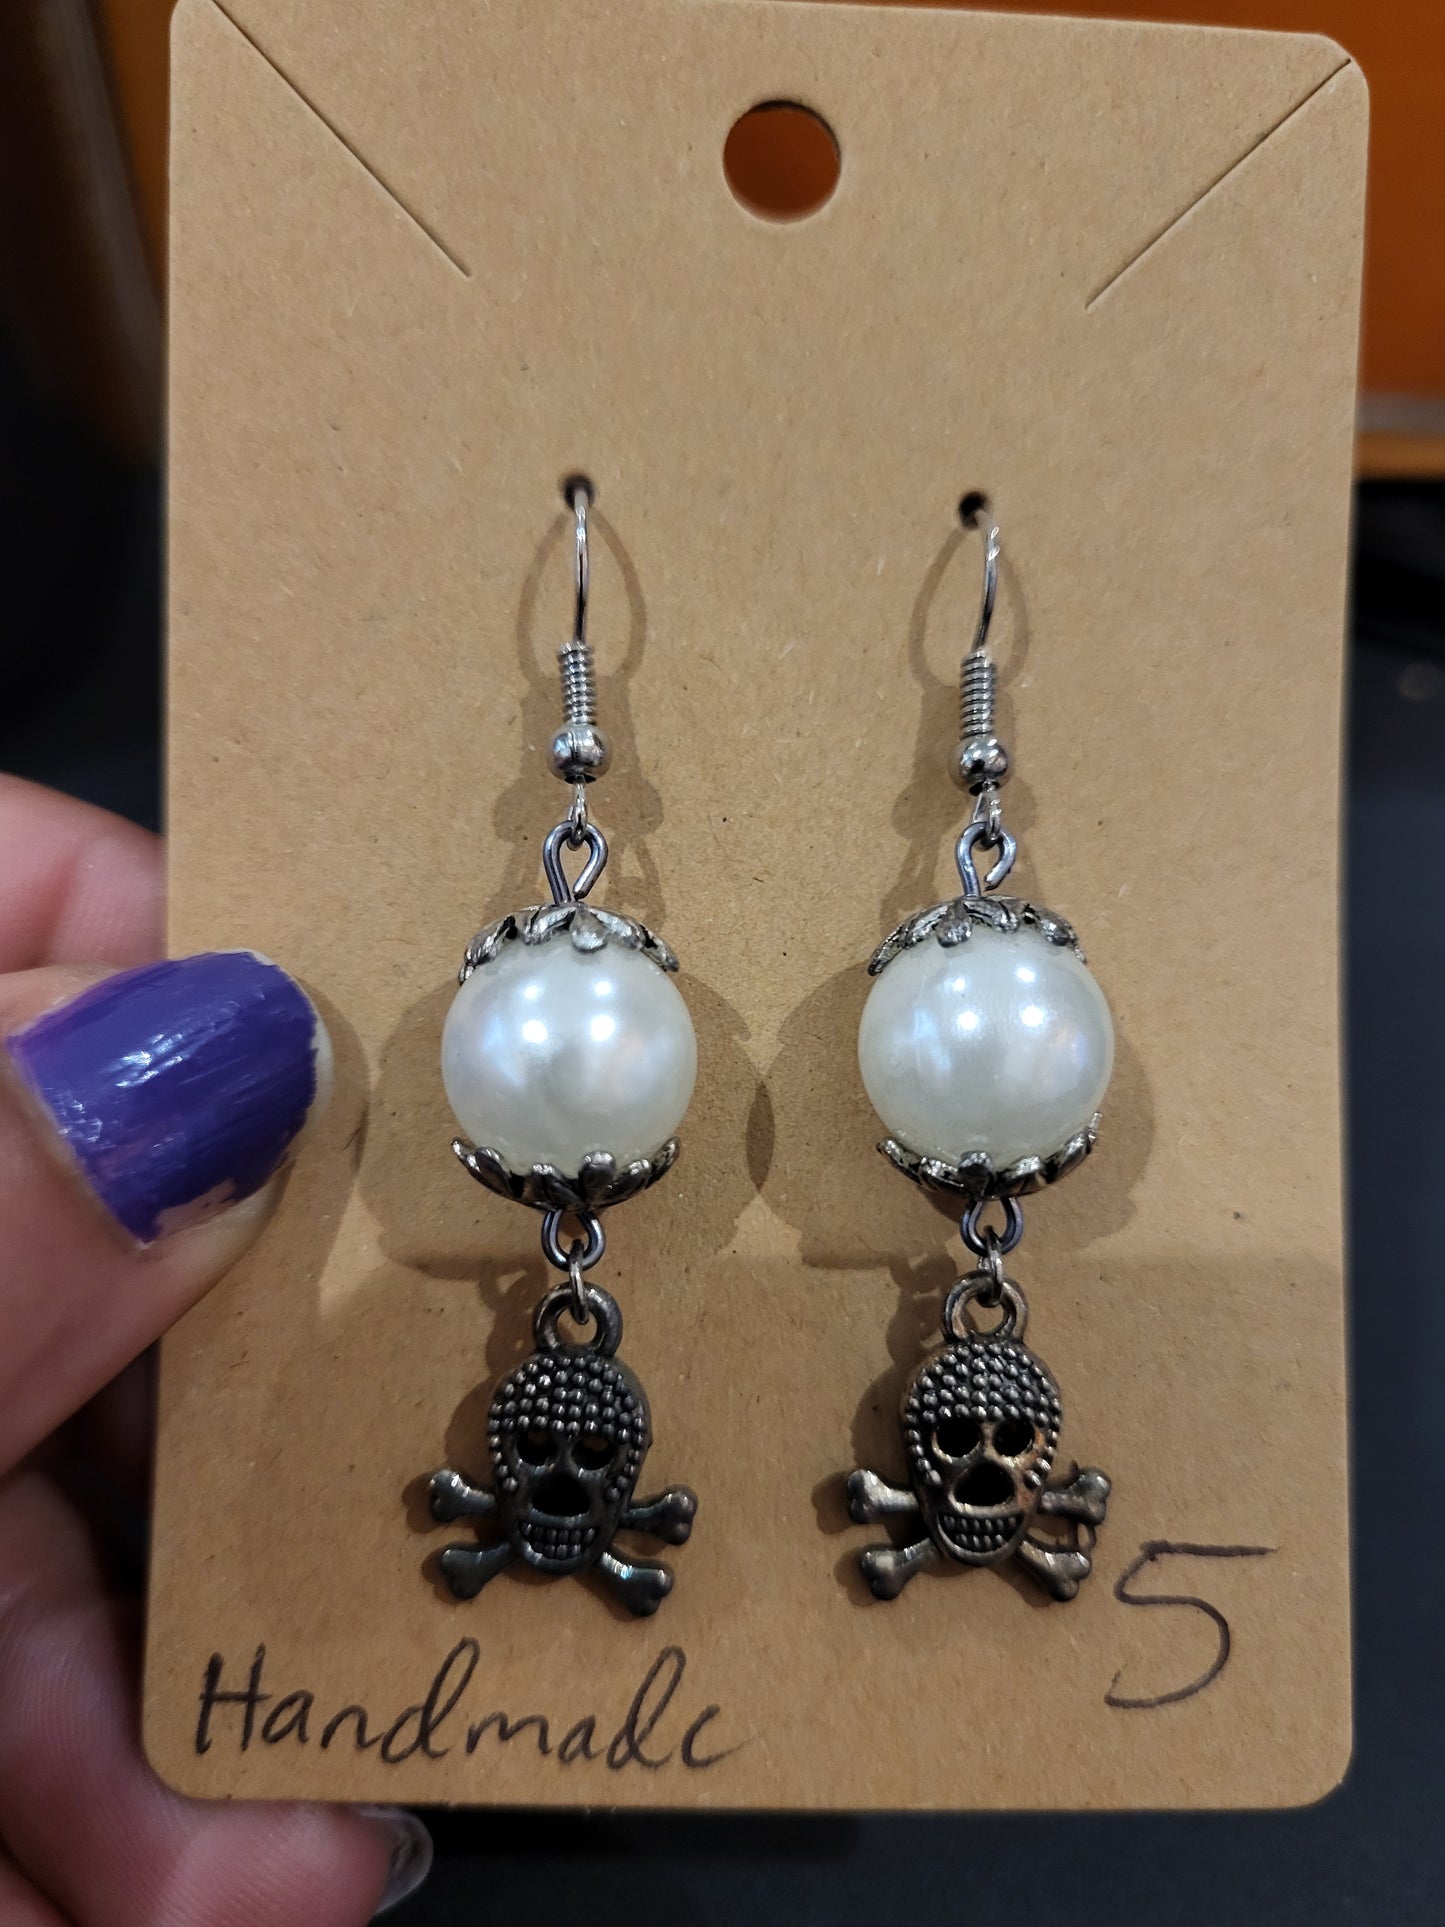 Handmade white and silver earrings with skull charm